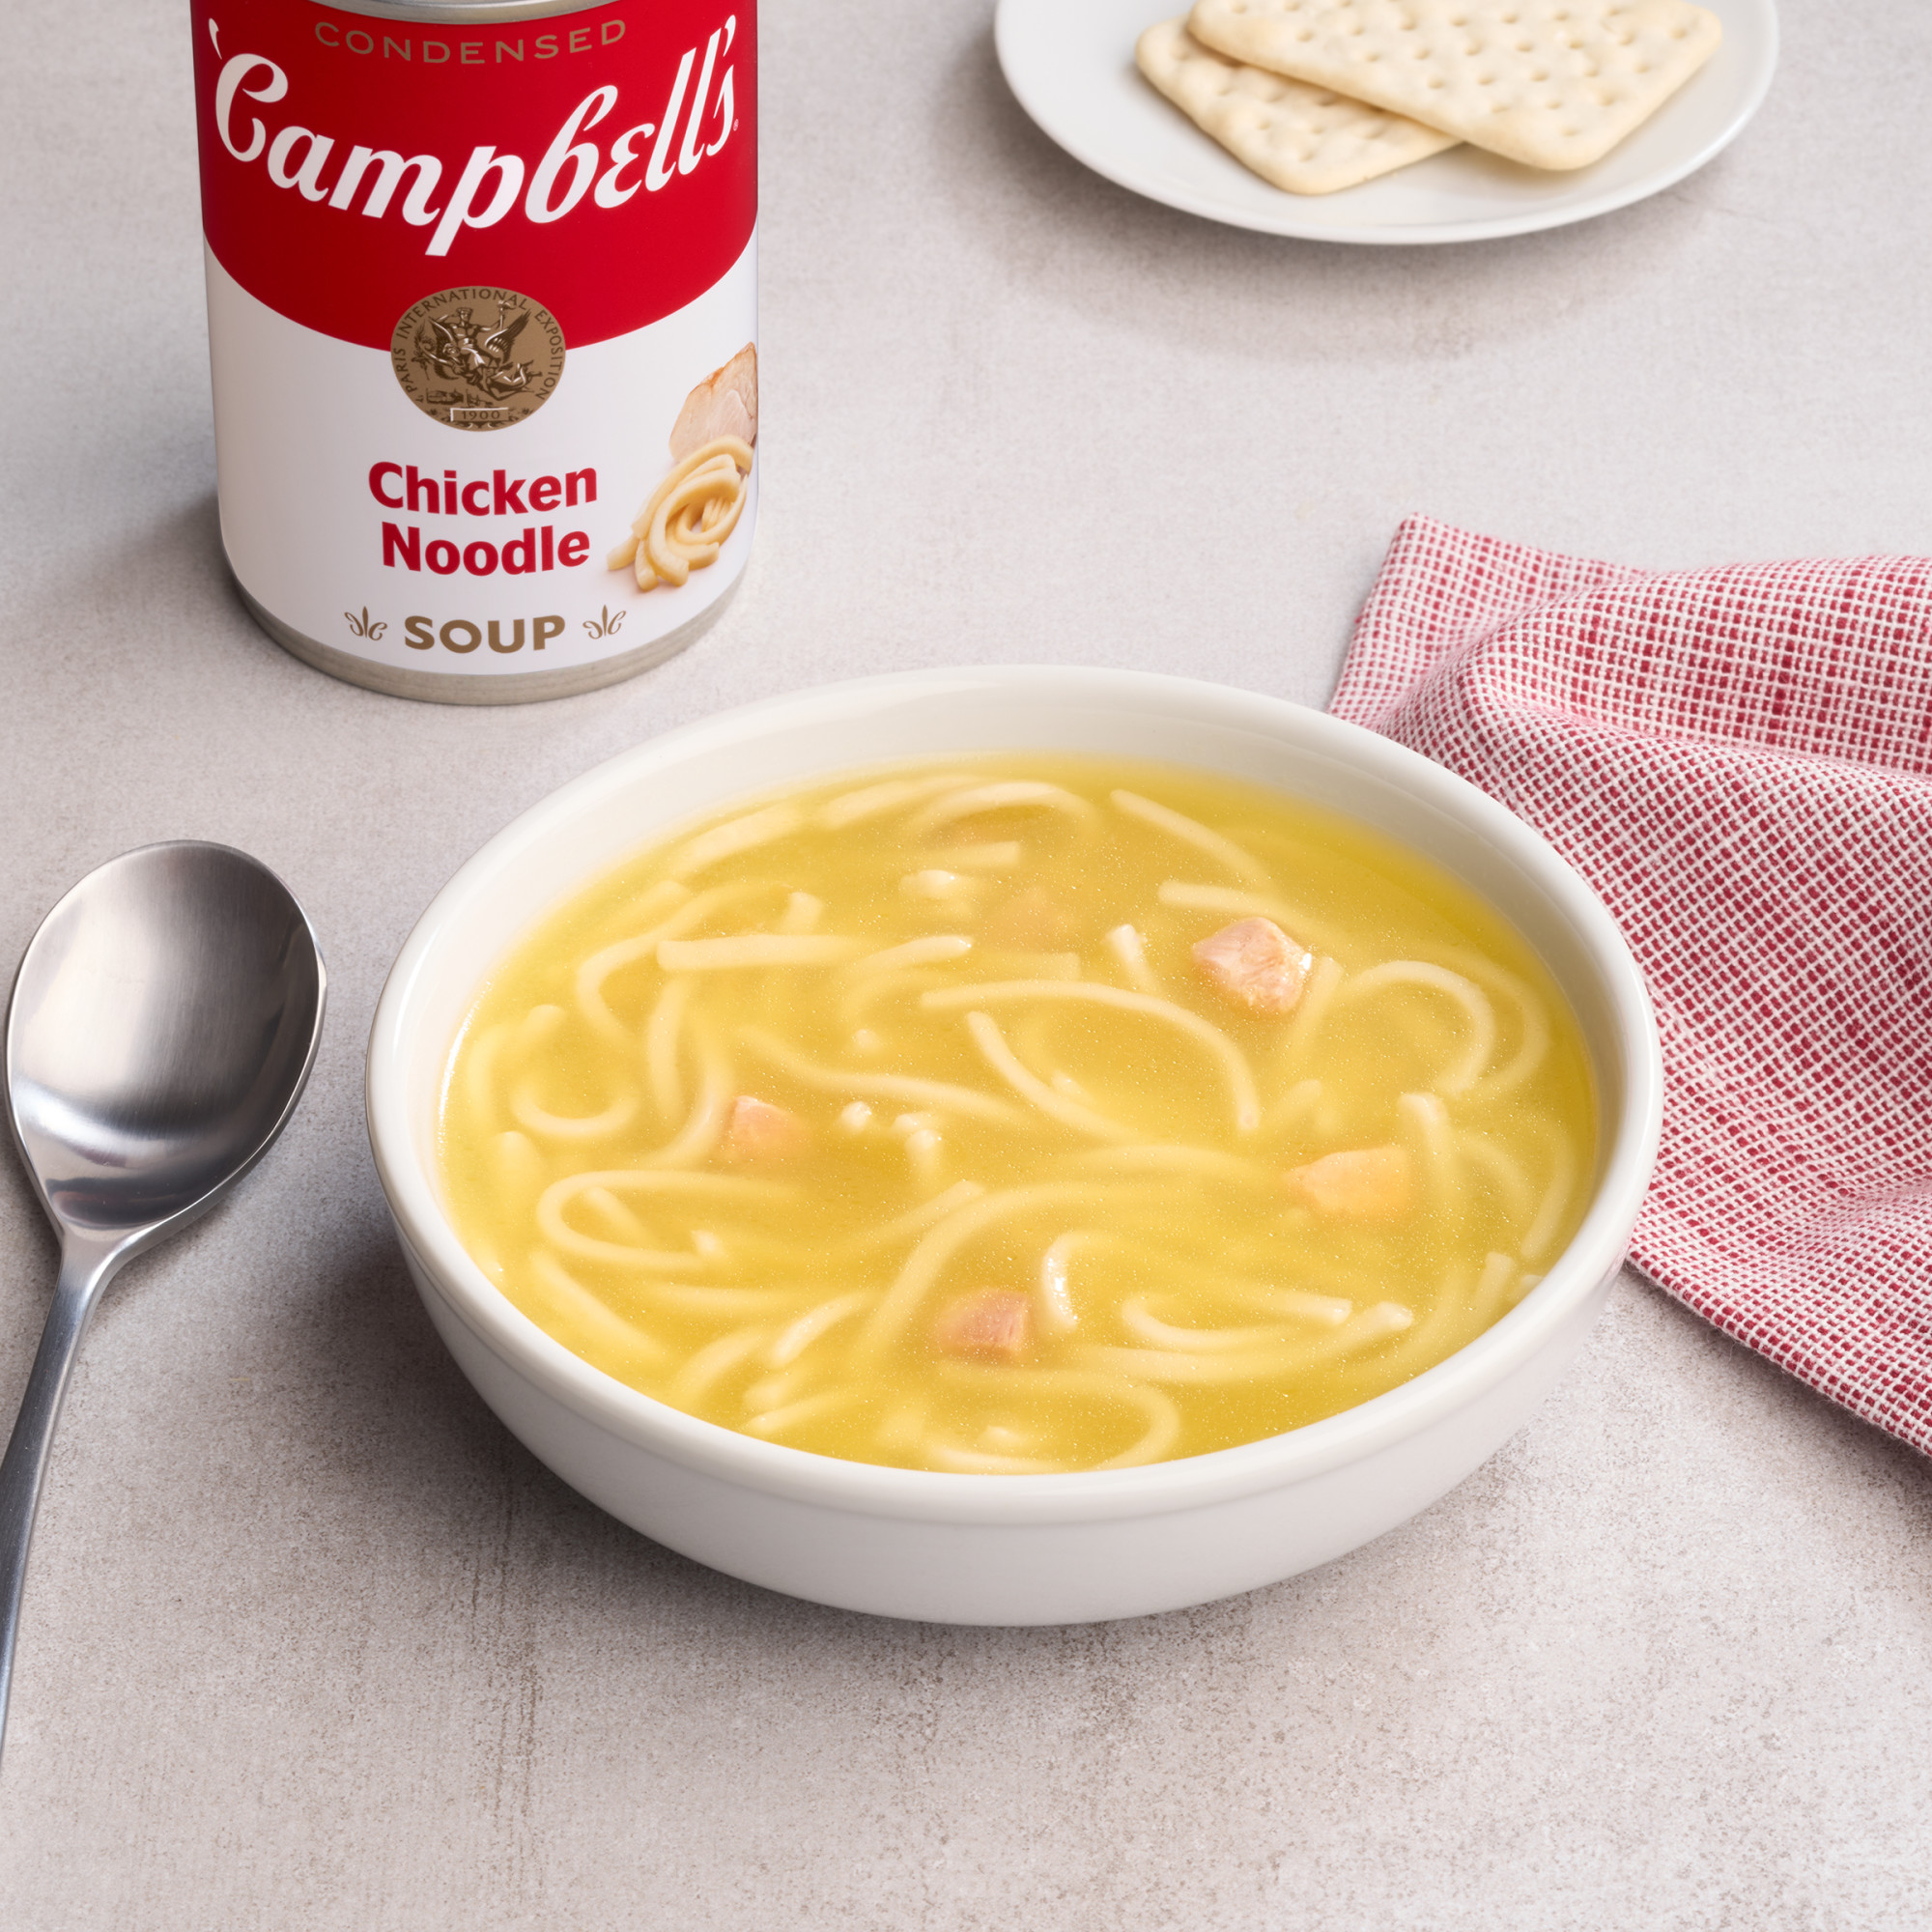 Campbell’s Condensed Chicken Noodle Soup, 10.75 oz Can, 4 Count - image 3 of 14